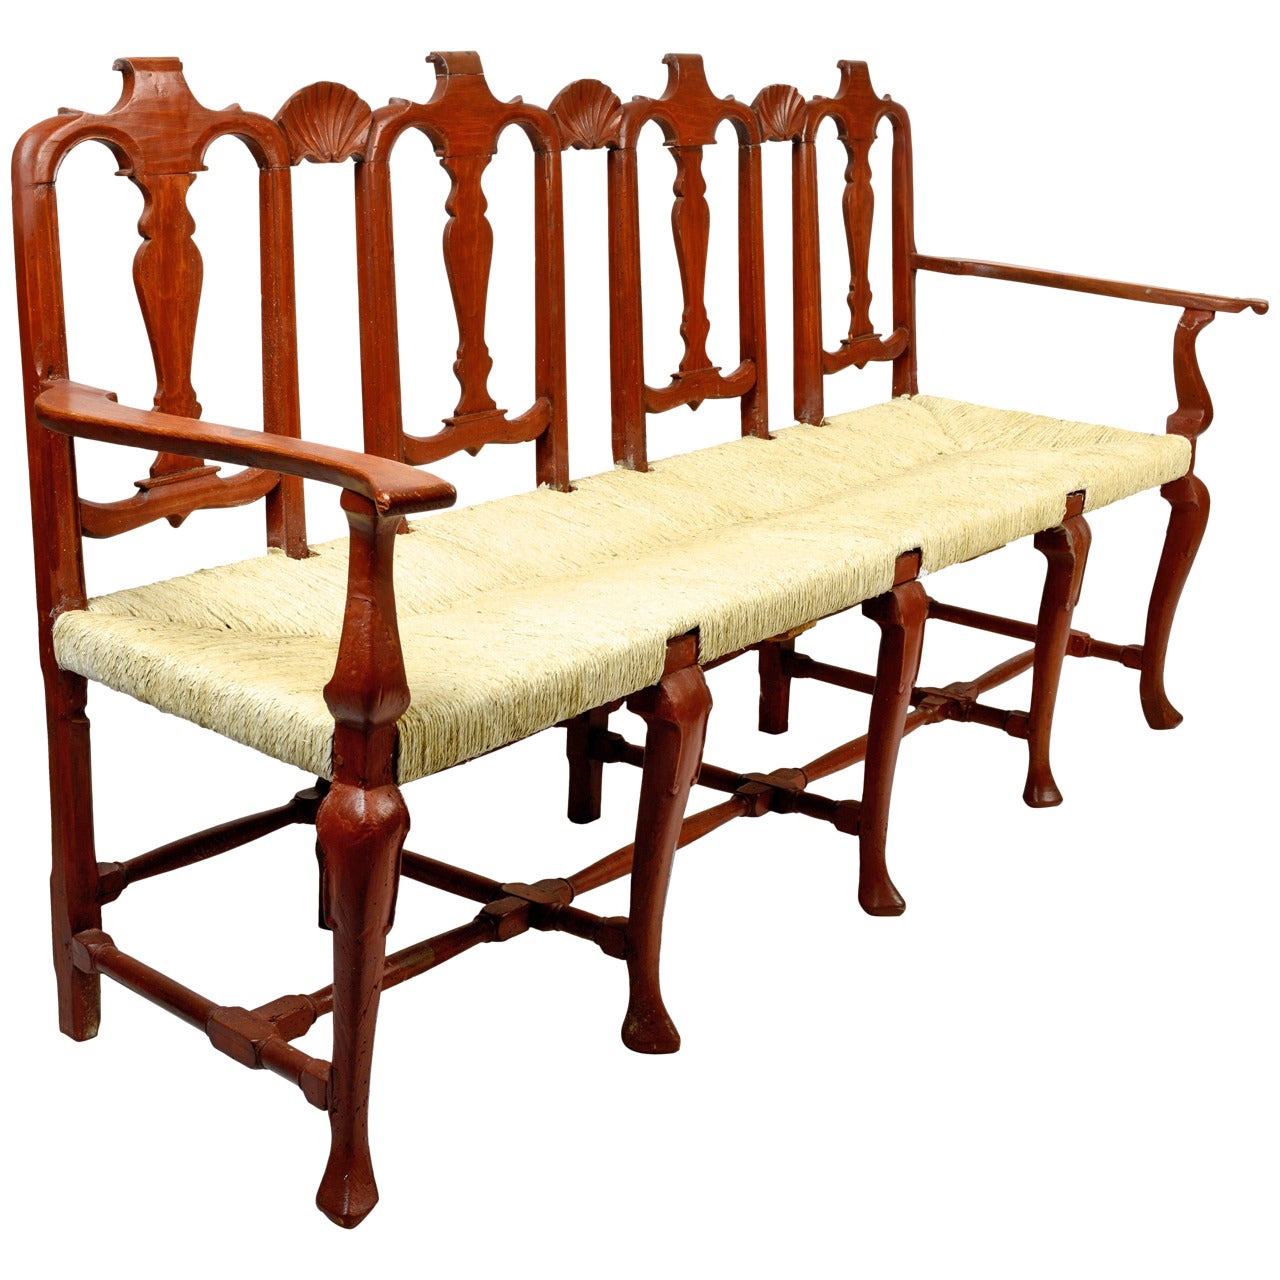 This unusual rush seated bench has four beautifully carved backs connected with three carved shells. It stands on five cabriole legs with trifid feet. It has a red washed finish and a painted rush seat. A great piece for a sizable entry or